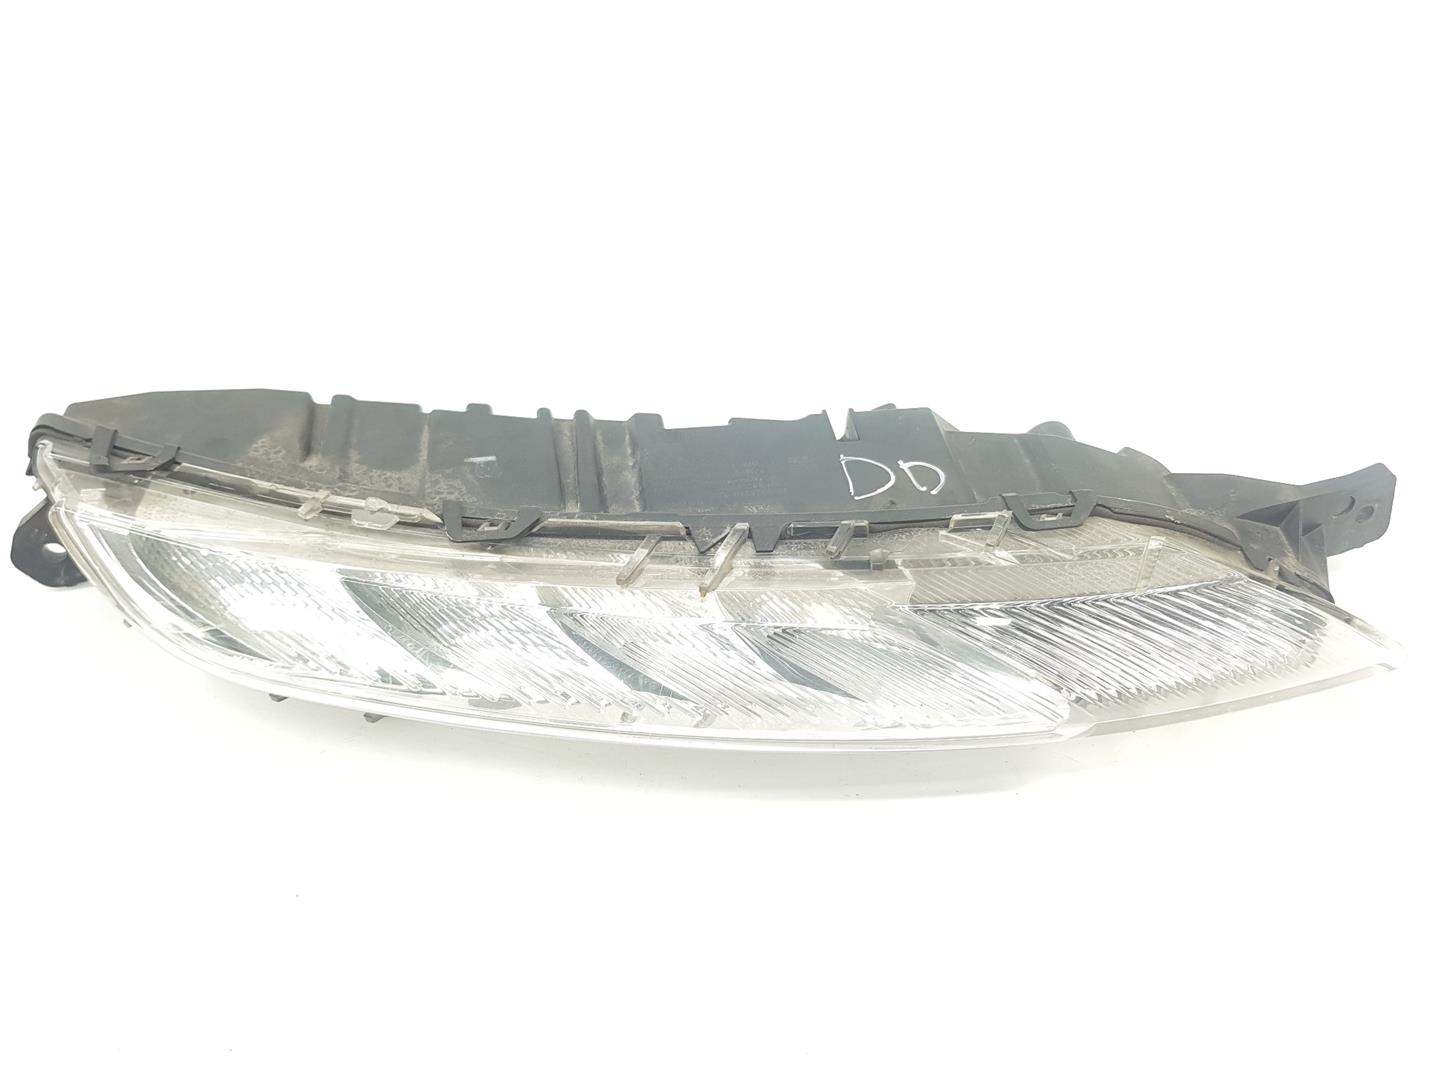 CITROËN C4 Picasso 2 generation (2013-2018) Front Right Additional Light 9675974880, 9675974880 23799104